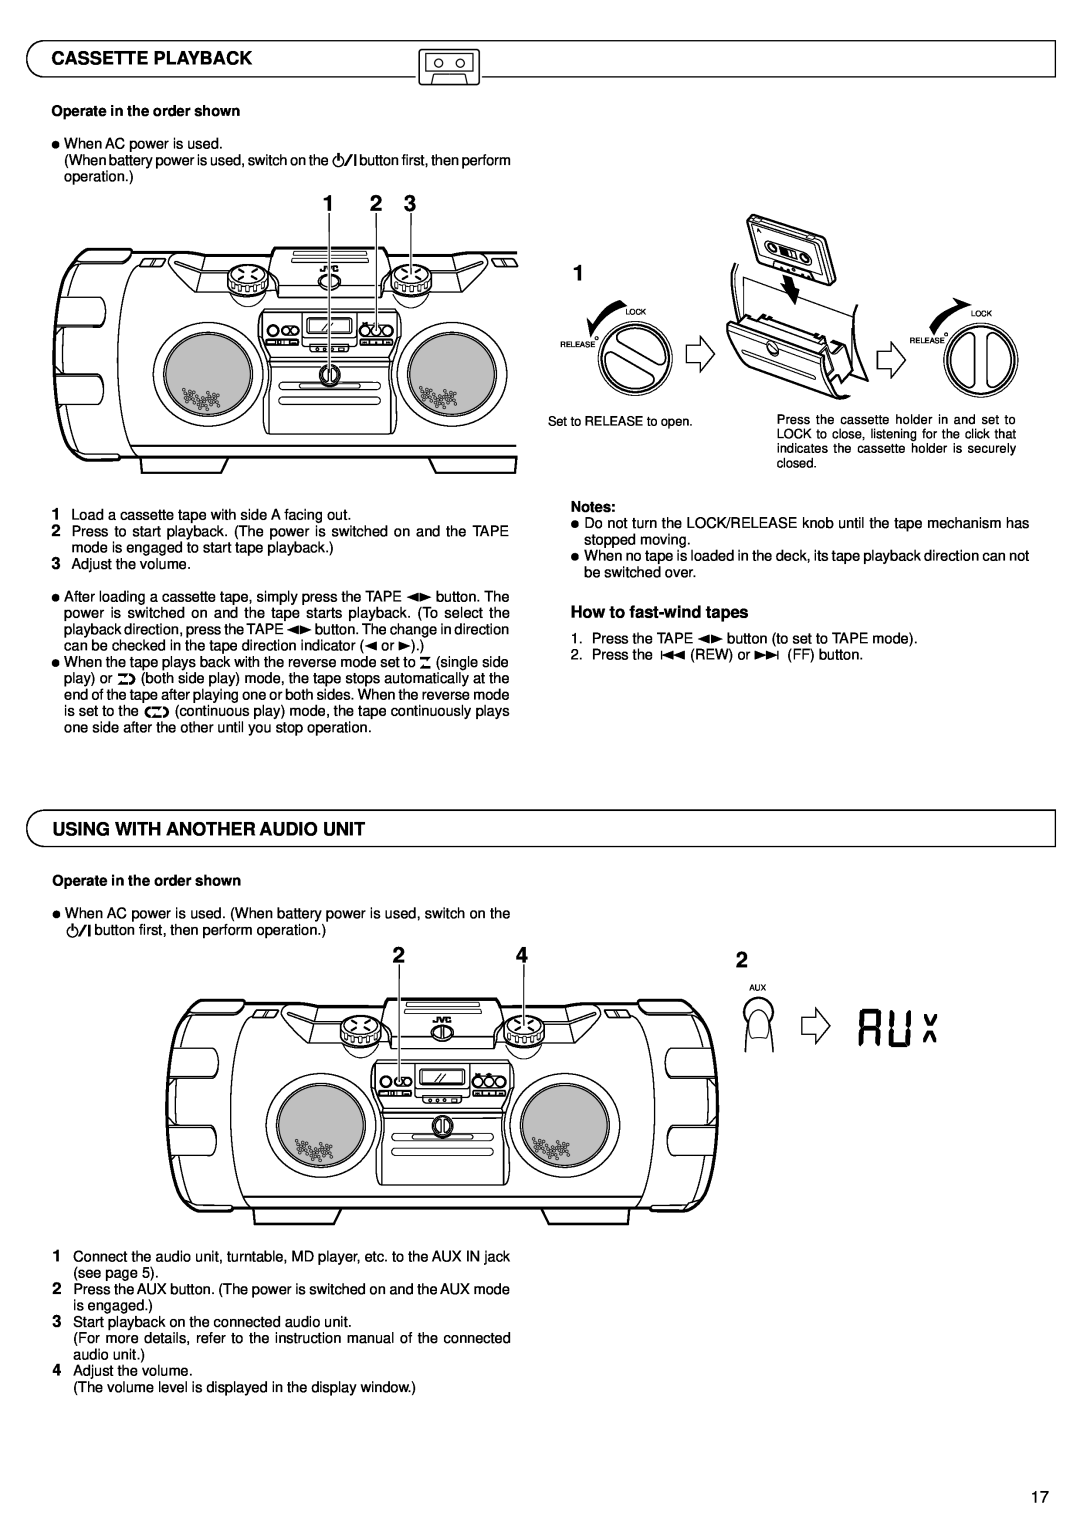 JVC RV-B99 BK/BU manual Cassette Playback, Using With Another Audio Unit, Operate in the order shown 